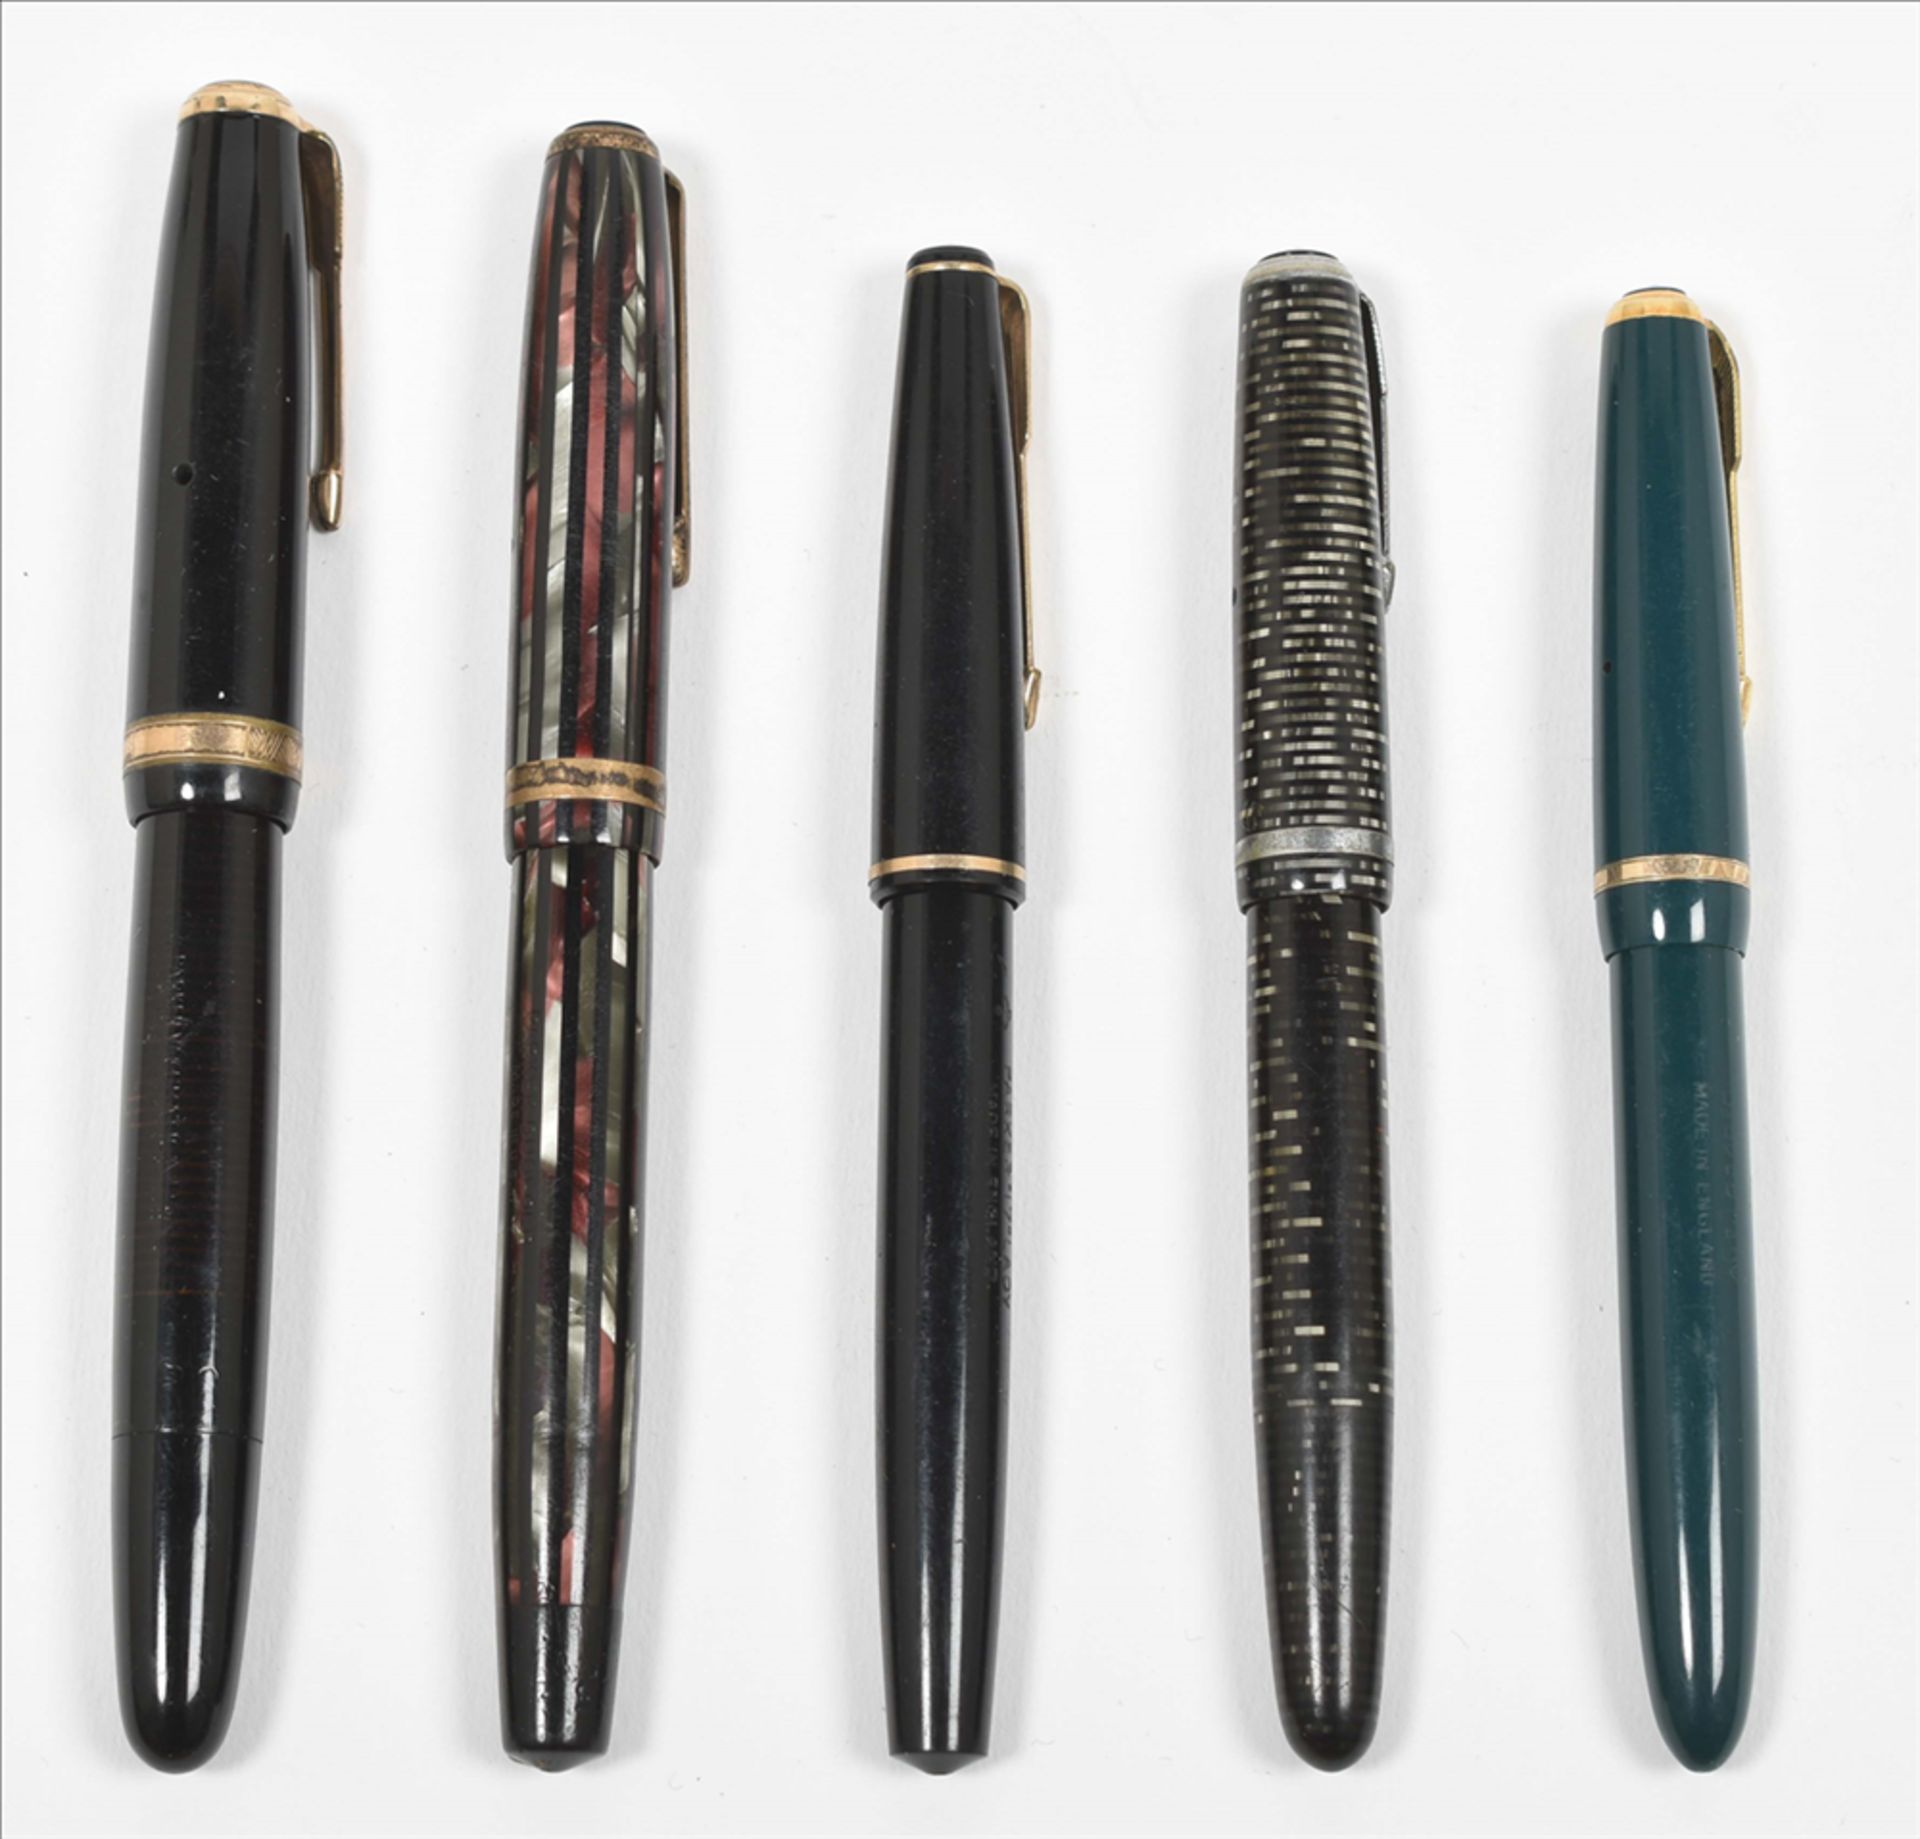 [Fountain pens] Collection of five Parker fountain pens with gold nibs